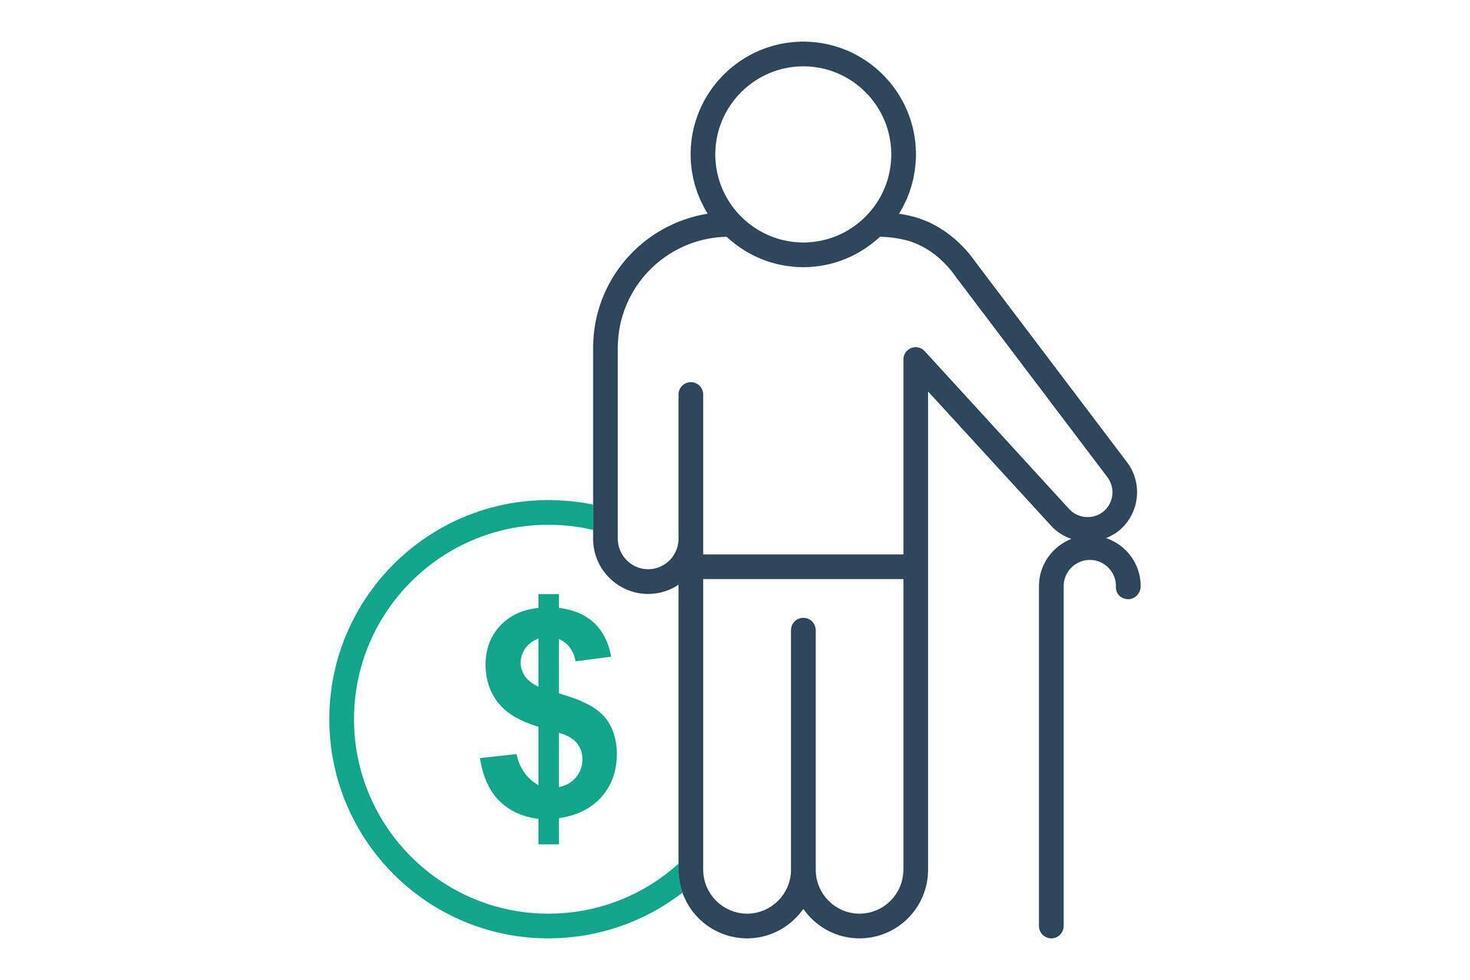 pension icon. elderly with dollar. icon related to elderly. line icon style. old age element illustration vector